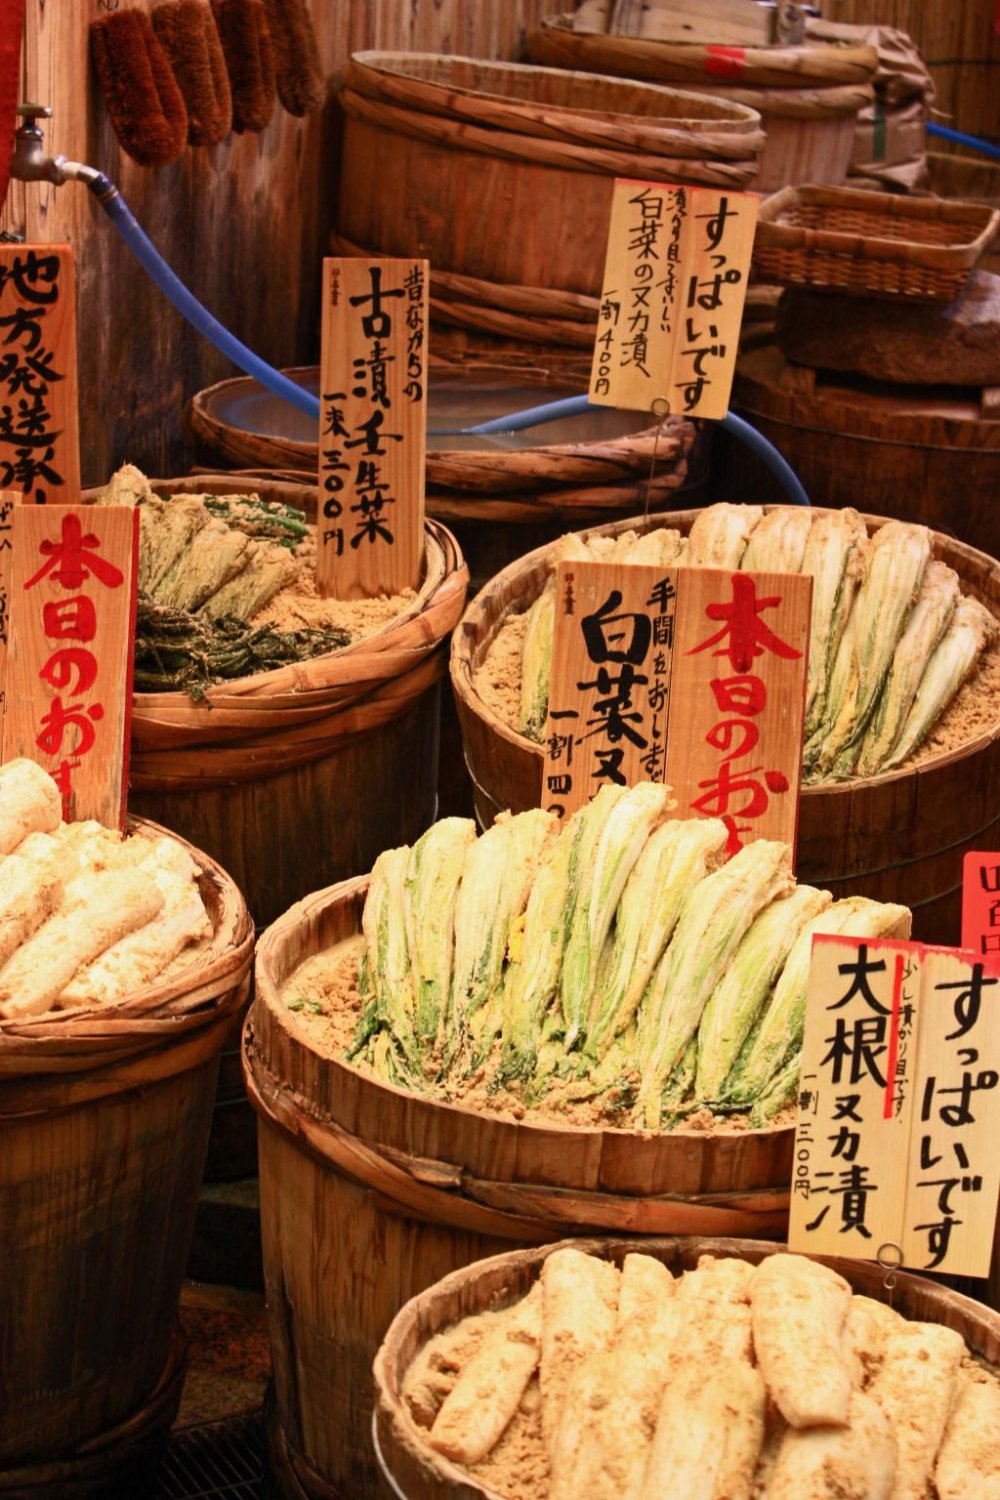 Wander through the covered Nishiki market and sample a variety of different types of food from around Japan. Many shops offer free tasters, so this is the perfect time to be brave and taste something new.